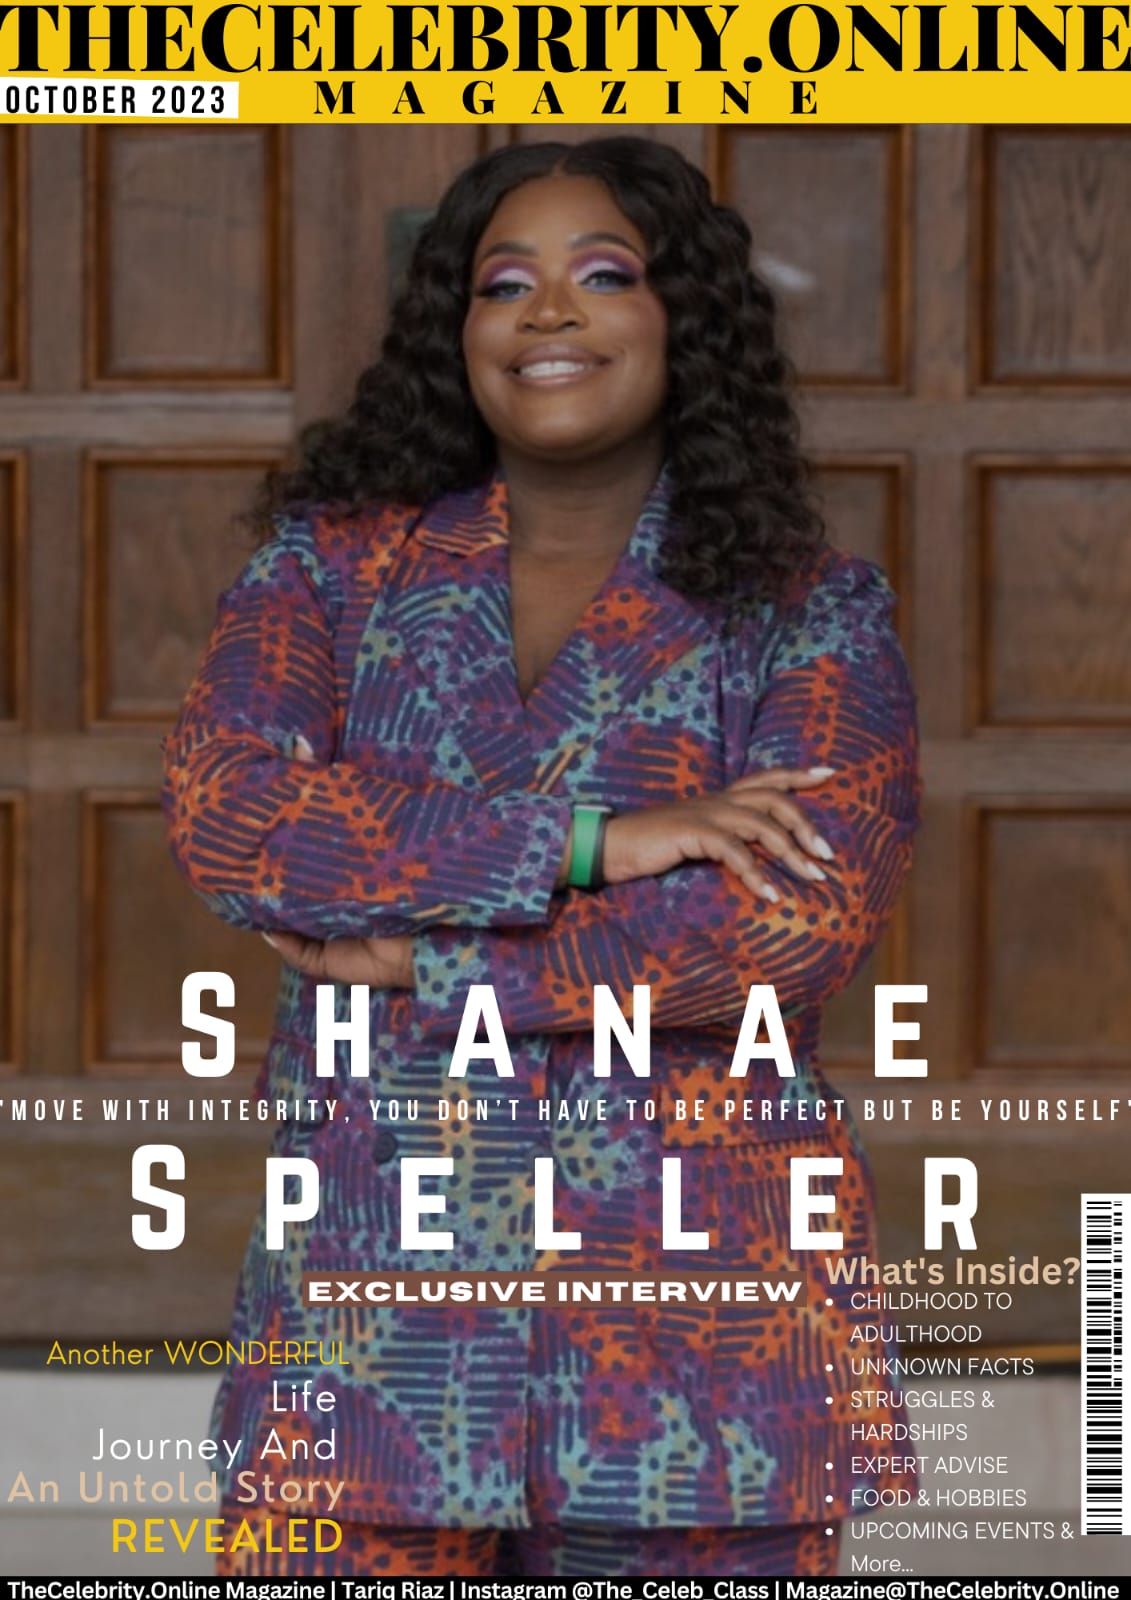 Shanae Speller Exclusive Interview – ‘Move With Integrity, You Don’t Have To Be Perfect But Be Yourself’